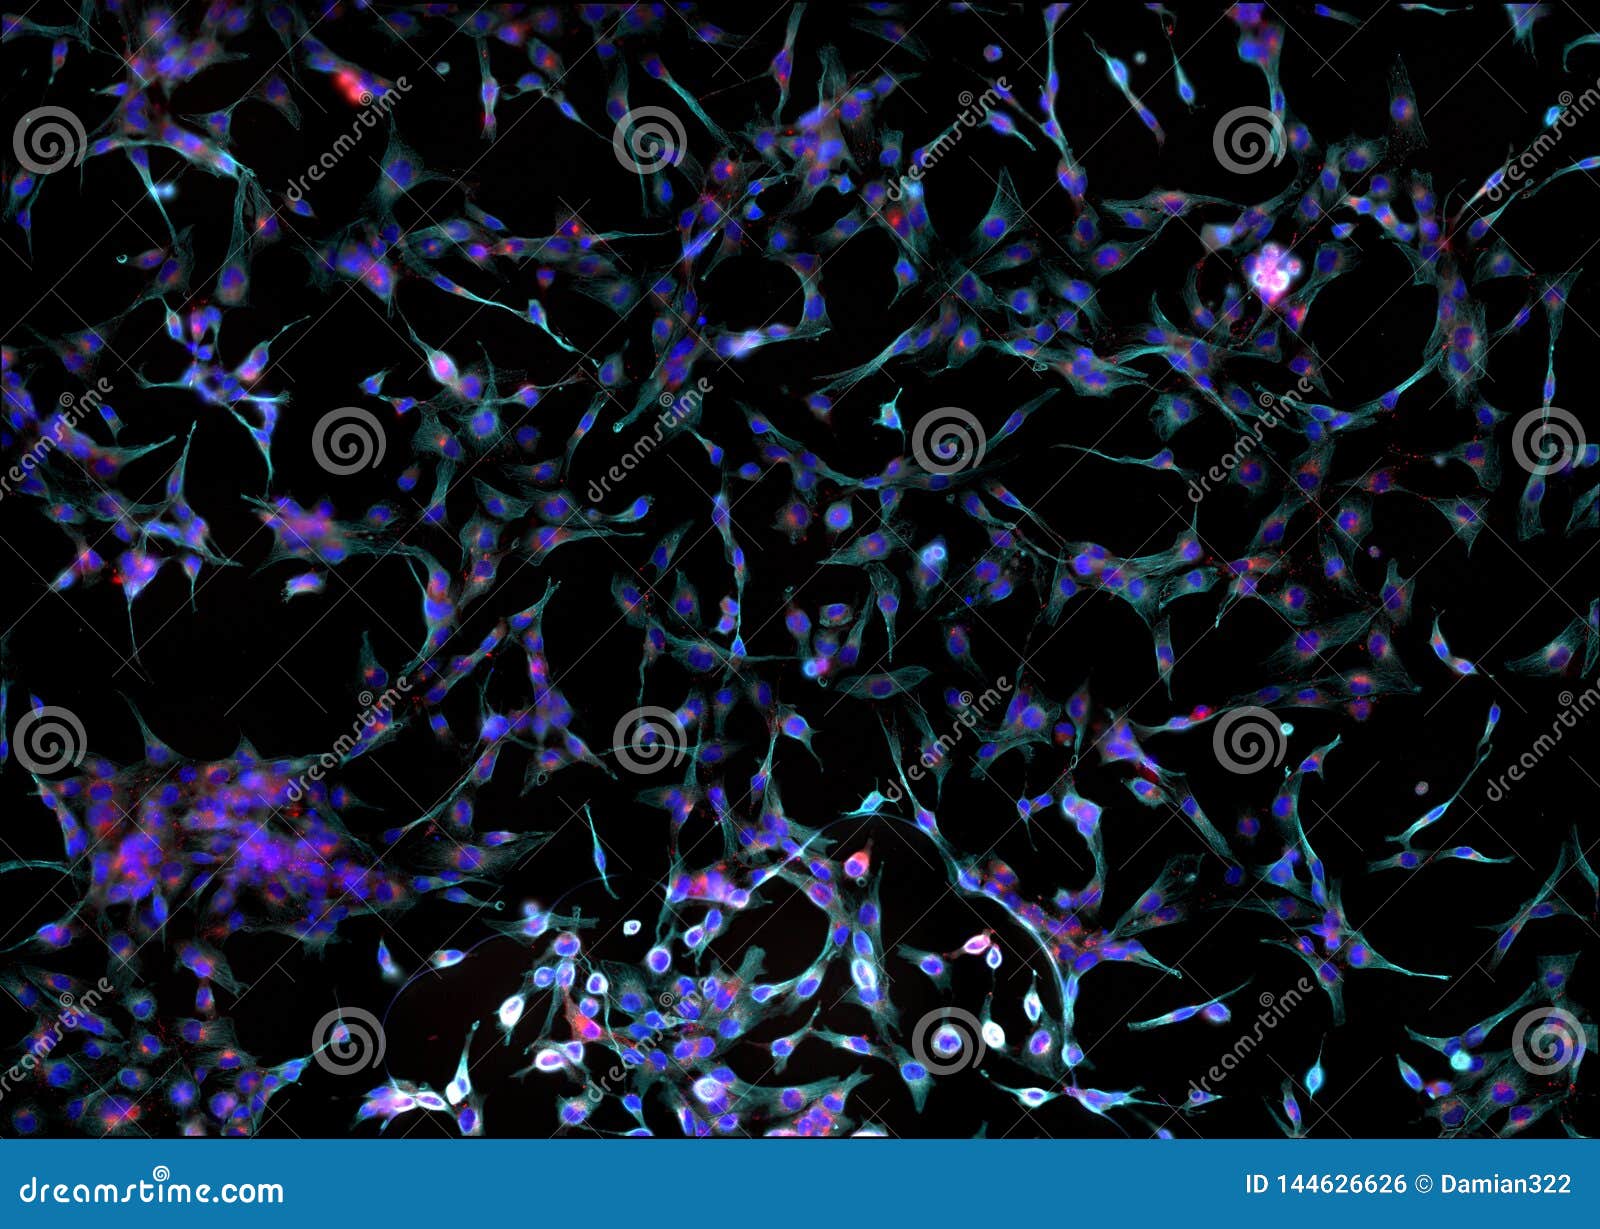 real fluorescence microscopic view of human fibroblasts